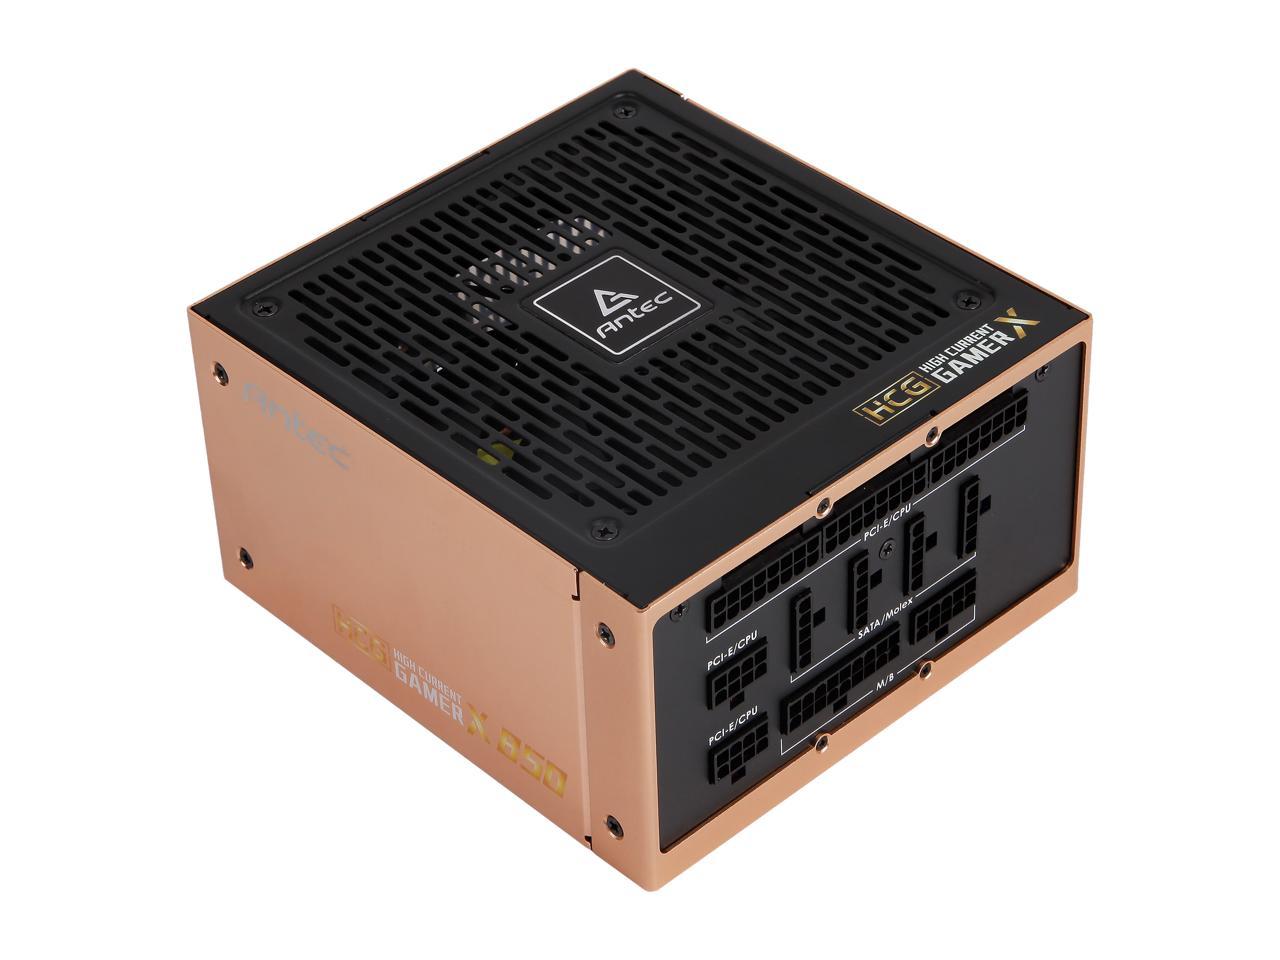 ANTEC High Current Gamer Series HCG850 Extreme, 850W Fully Modular, Full-Bridge LLC and DC to DC Converter Design, Full Japanese Caps, Zero RPM Manager, PhaseWave Design, 10 Year Warranty